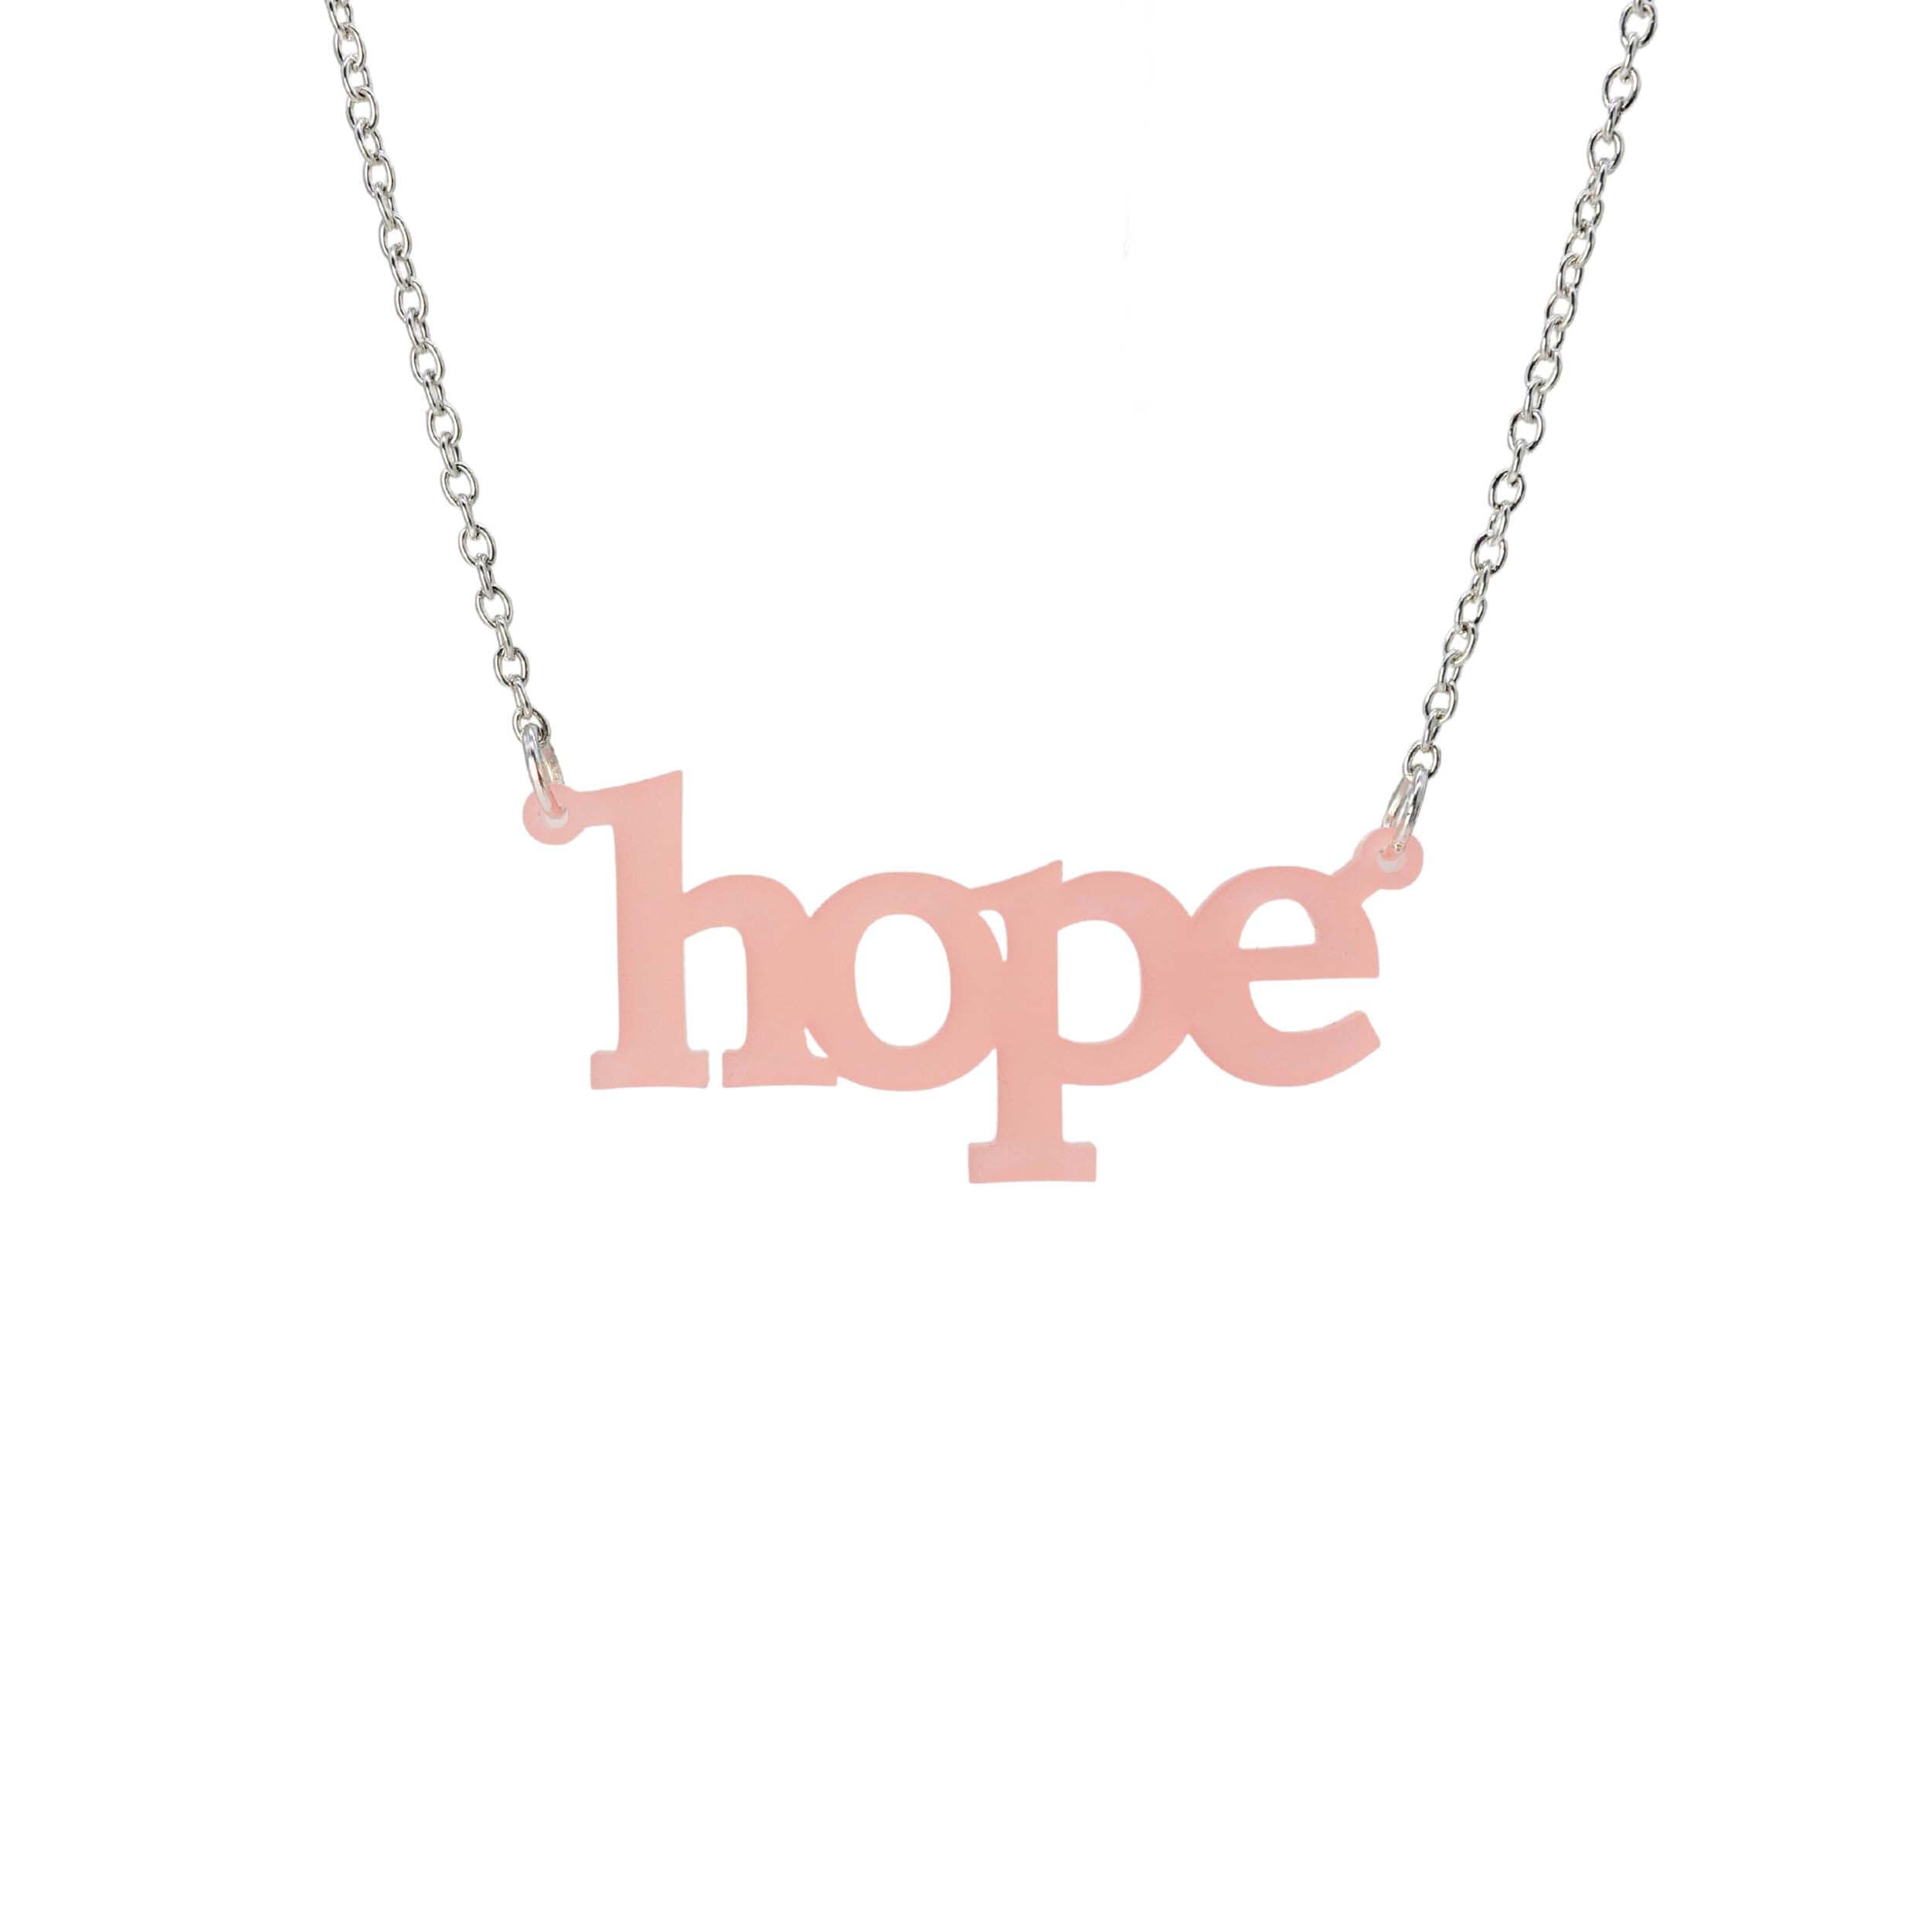 Hope necklace in blush pink shown on a silver chain hanging on a white background. 